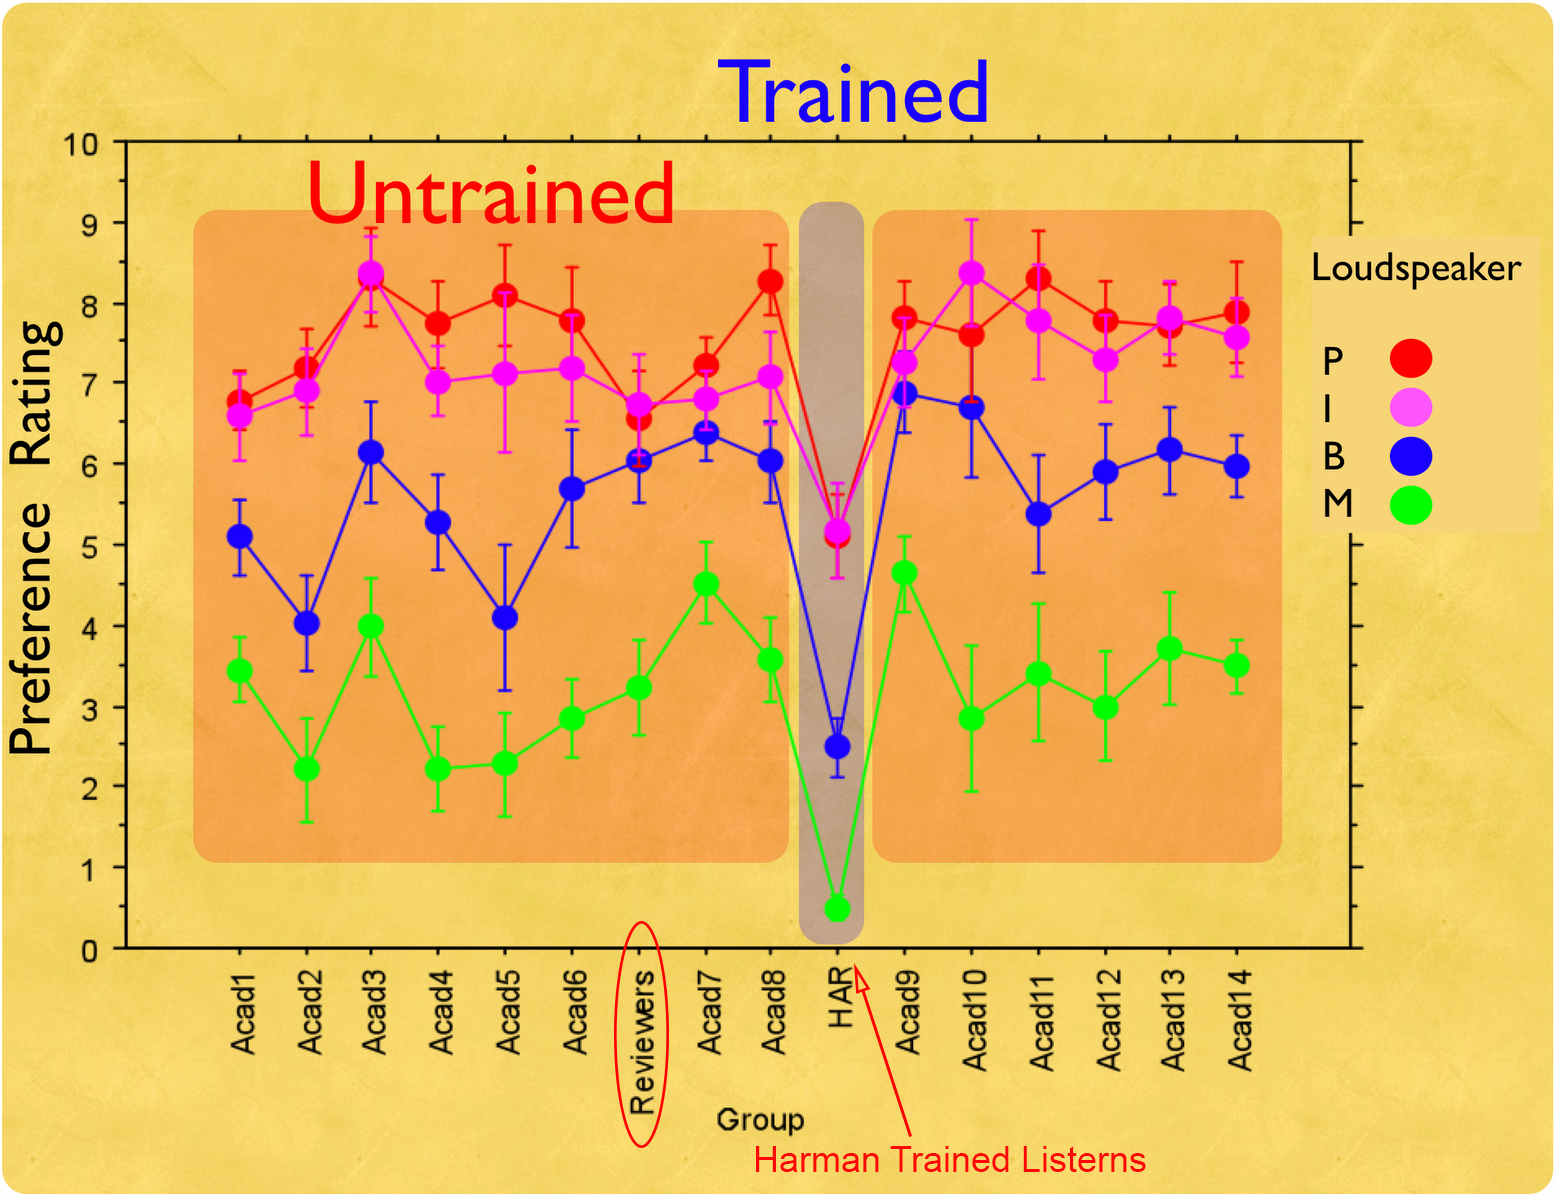 Harman Trained vs Untrained.png